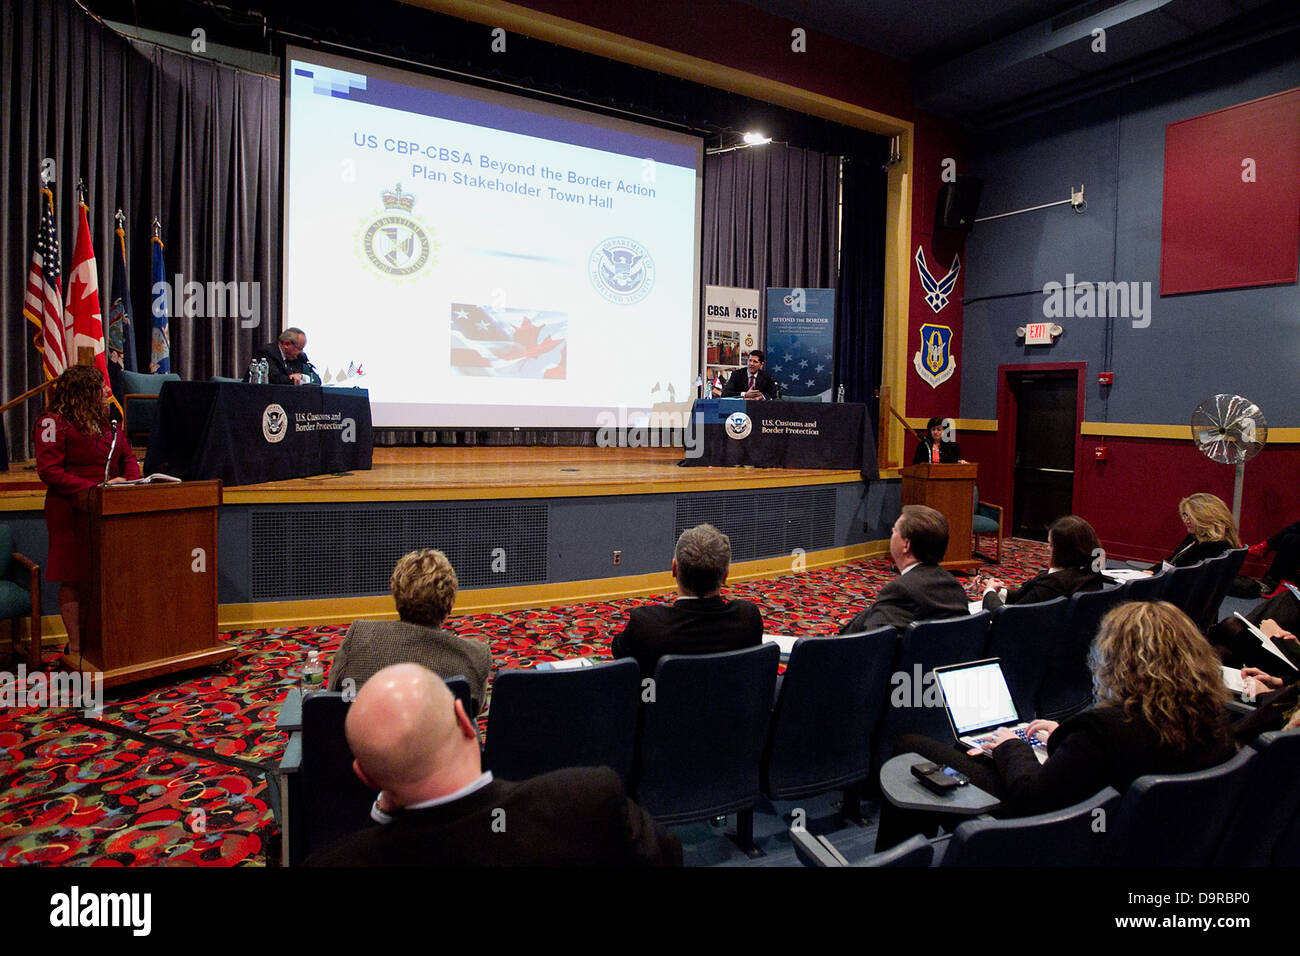 001 CBP, Canada Border Services Co-Host 'Beyond the Border' Stakeholder Meetings. Stock Photo